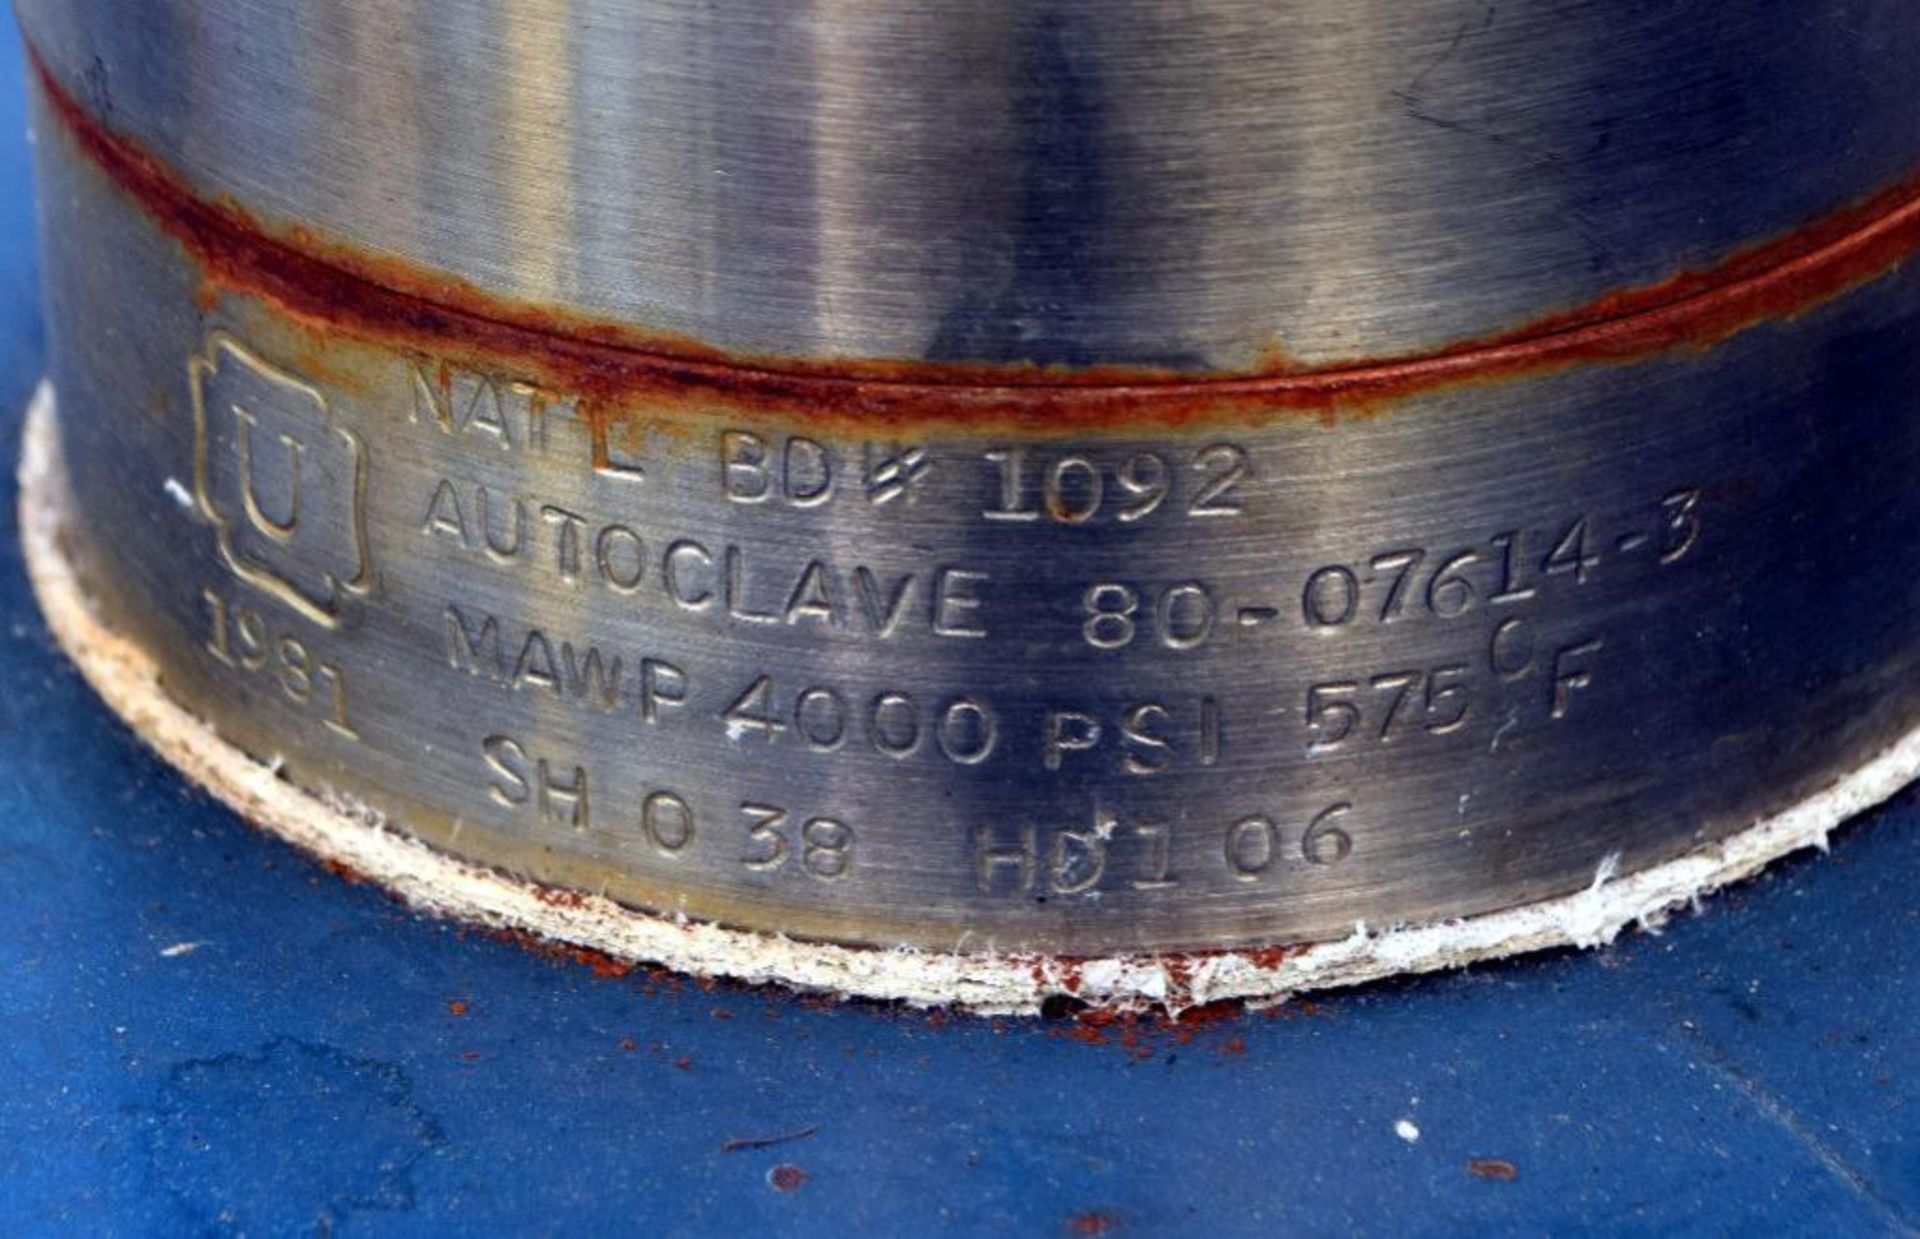 Autoclave Engineers Autoclave, 0.1 Gallon, Inconel 600. Vessel approximate 2-1/4" diameter x 7-1/2" - Image 5 of 7